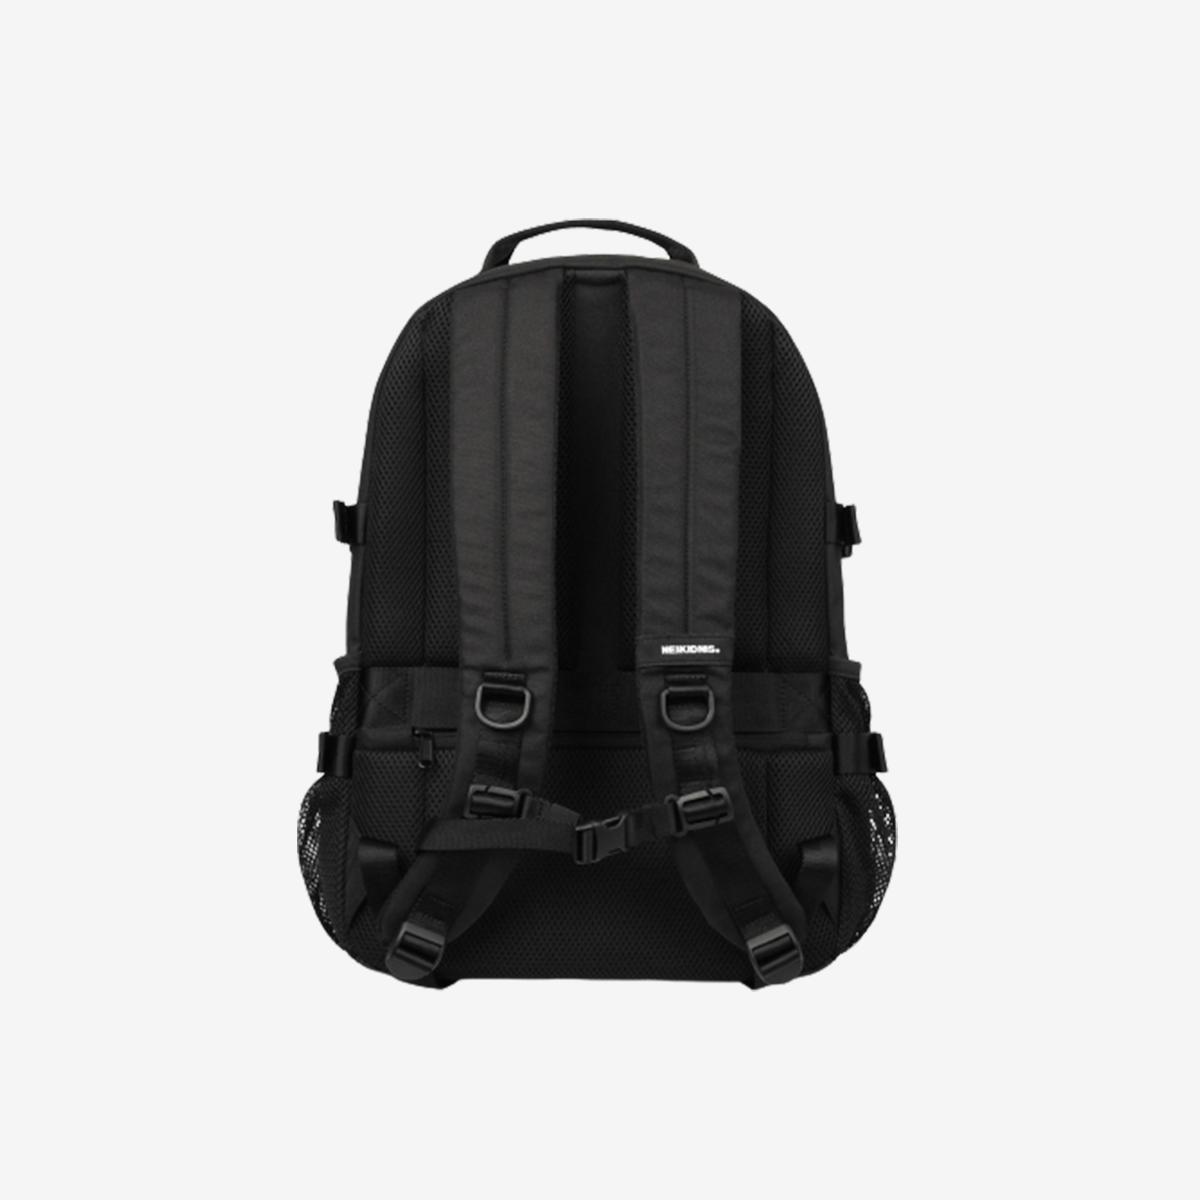 ABSOLUTE BACKPACK 後背包